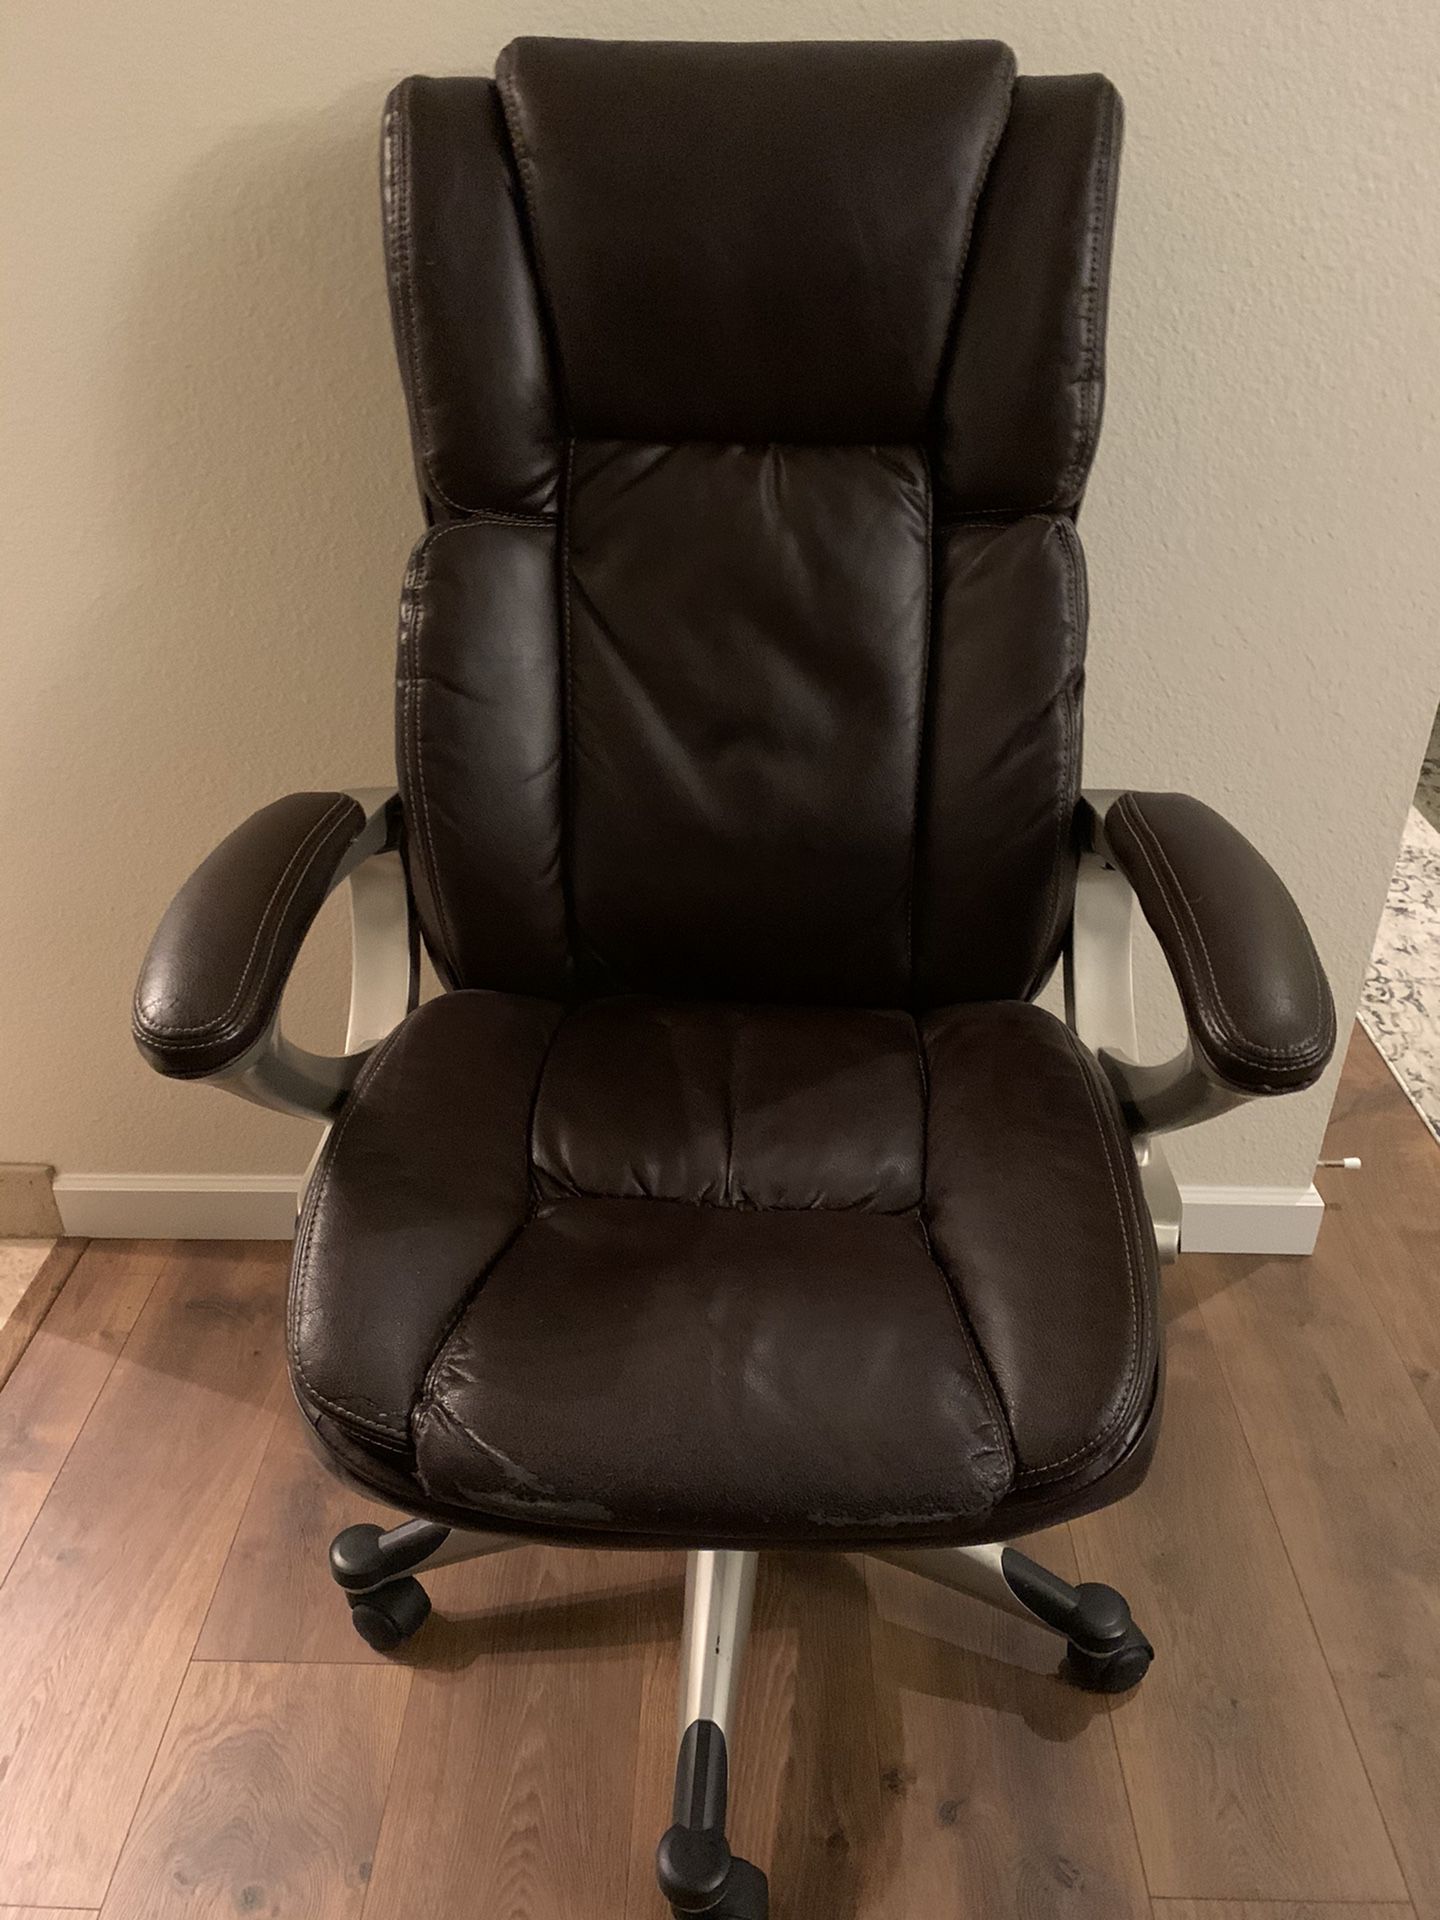 Office Depot Chair (read the description and look at the picture properly)